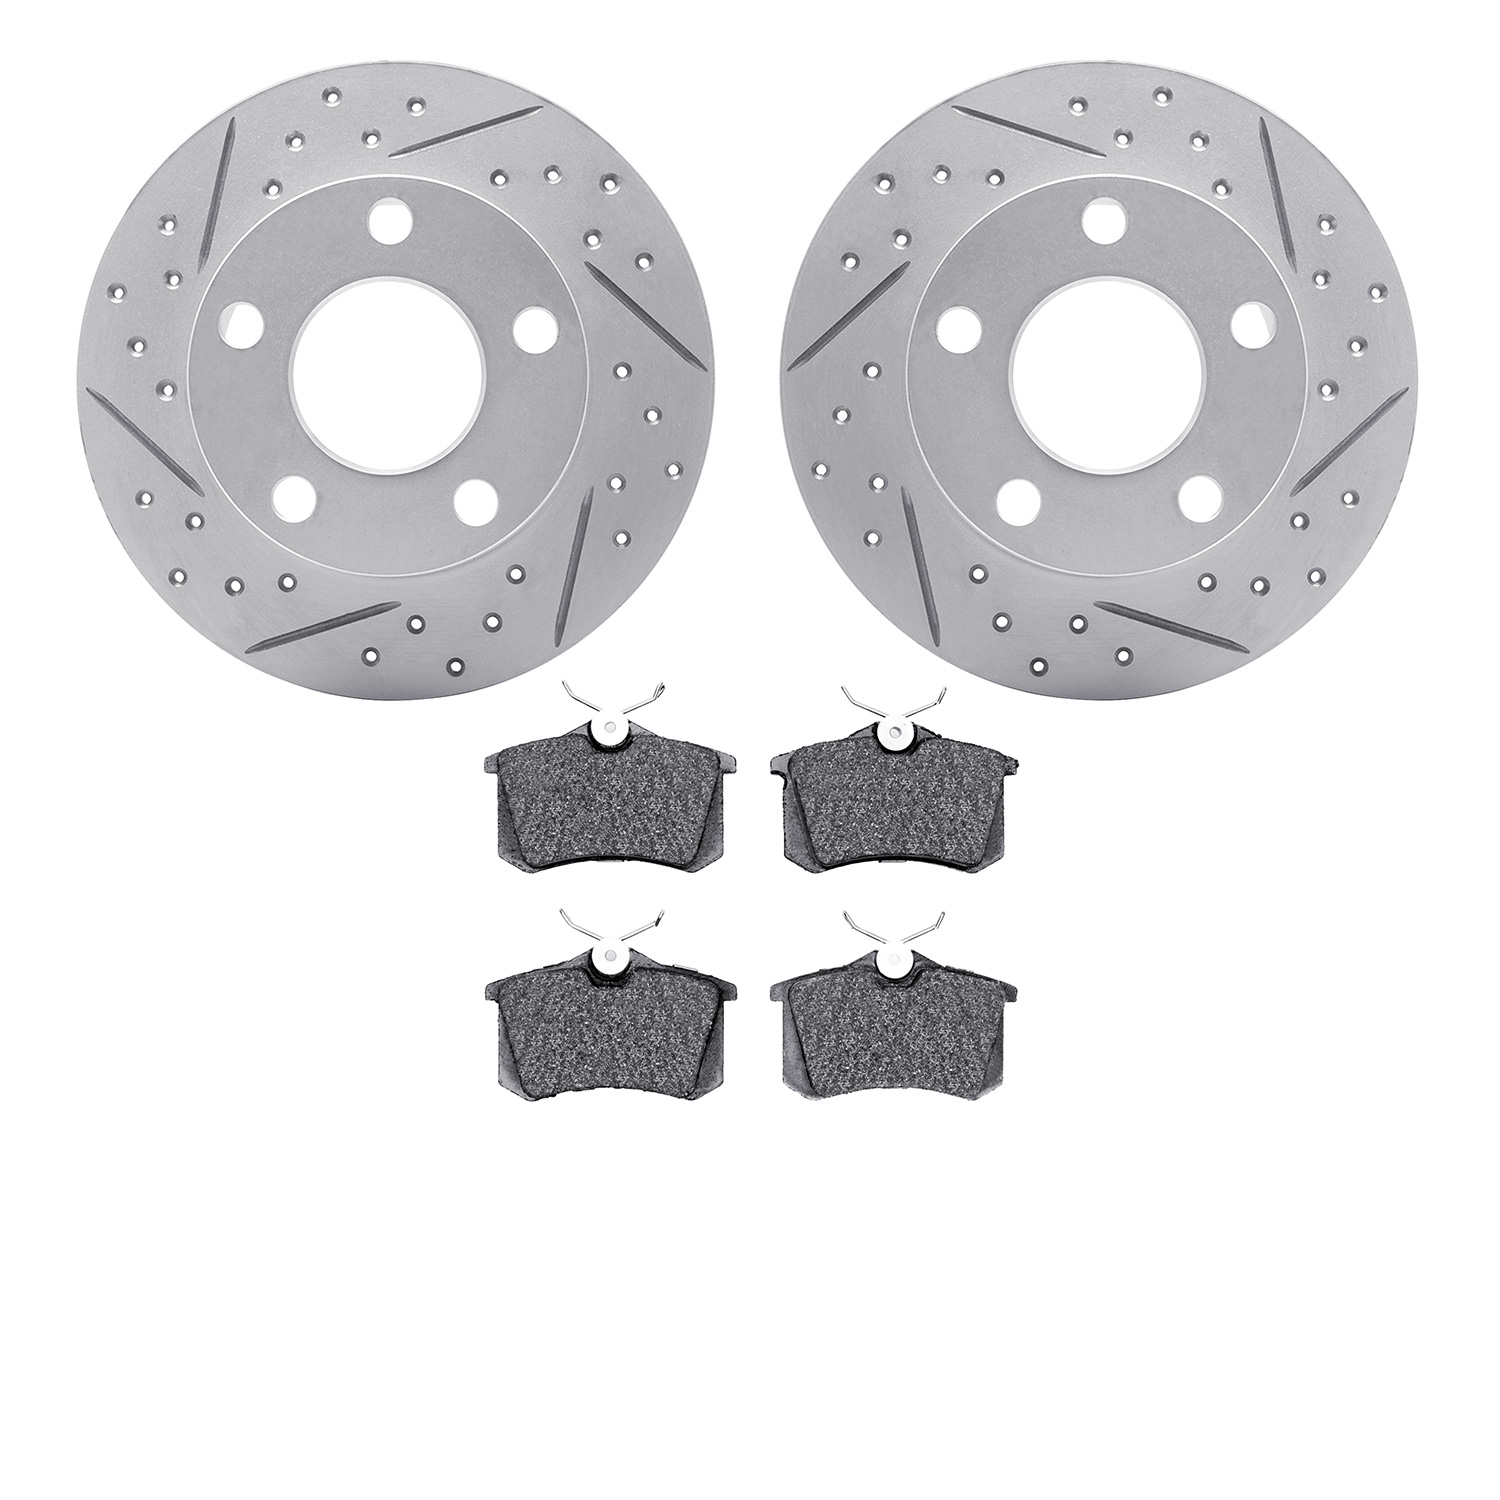 2502-74008 Geoperformance Drilled/Slotted Rotors w/5000 Advanced Brake Pads Kit, 1997-2005 Audi/Volkswagen, Position: Rear